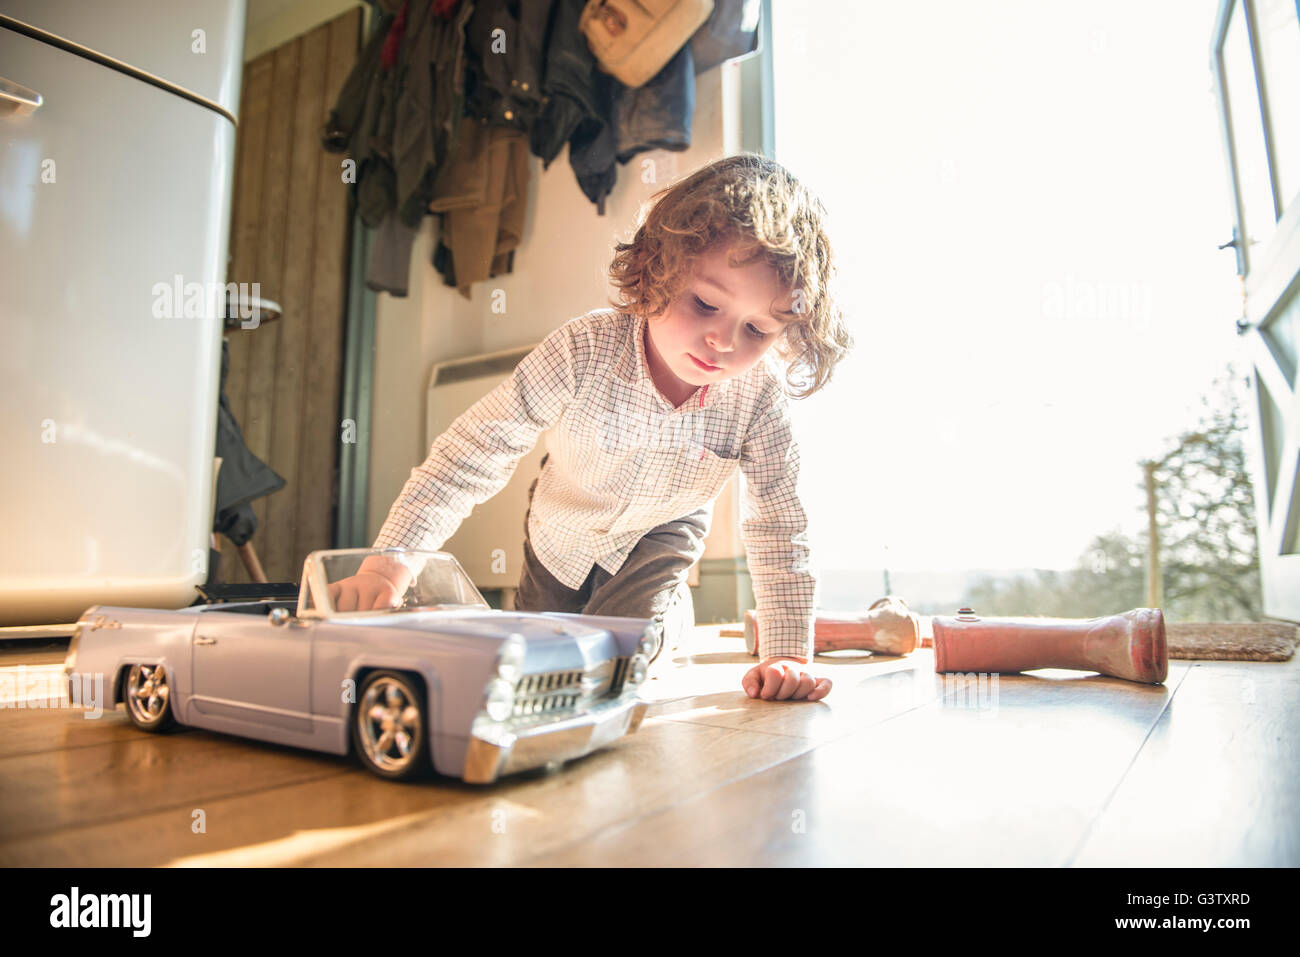 A four year old boy sitting at a back door playing with a toy car. Stock Photo